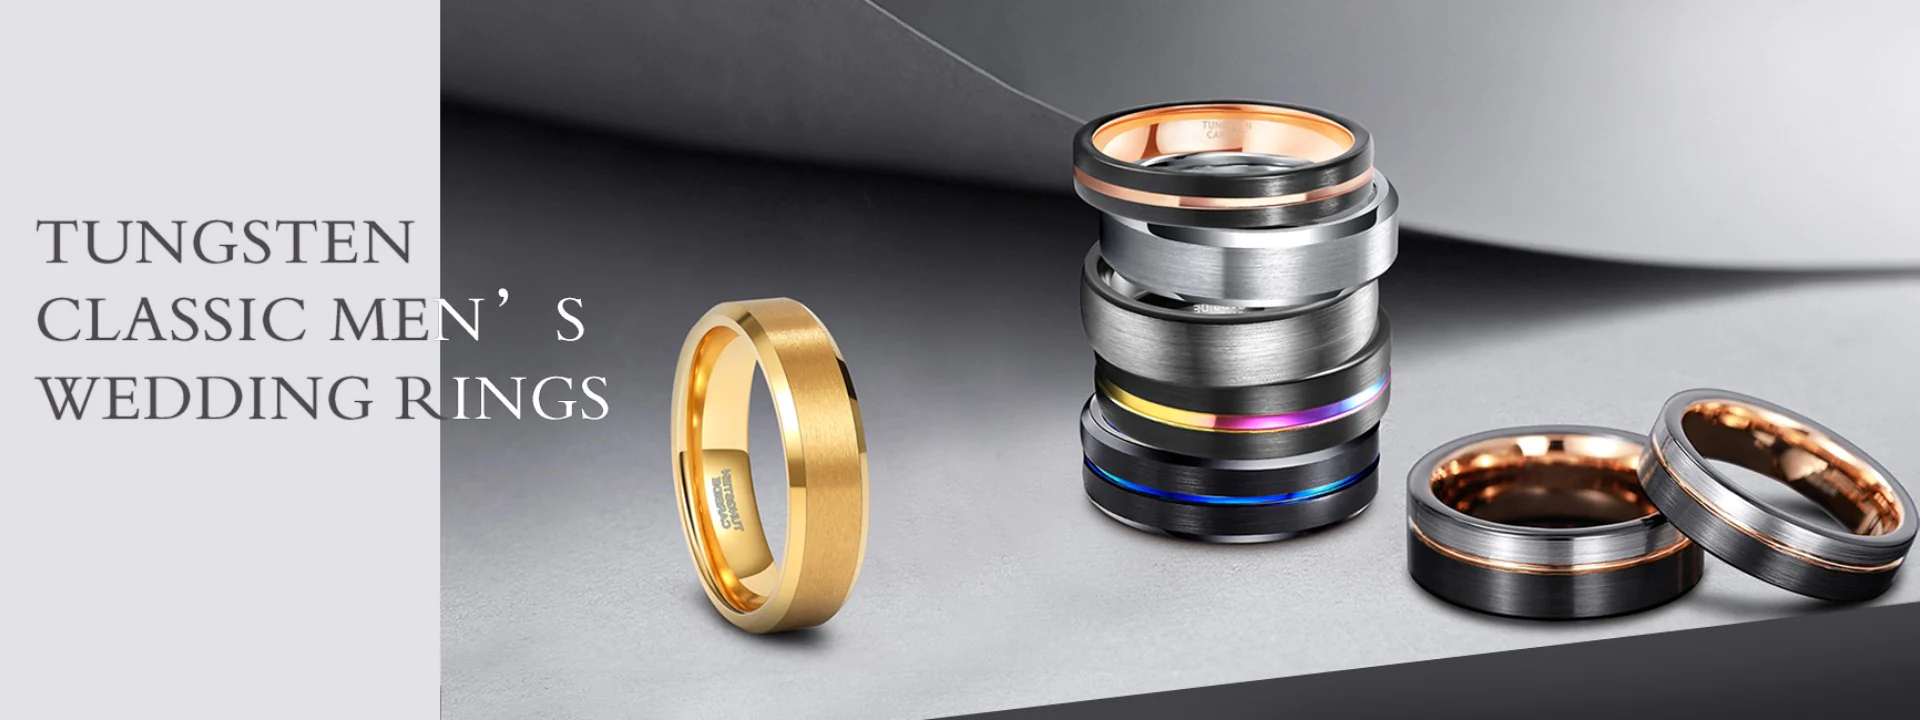 Tungsten Carbide Rings: Superiority in Style and Strength